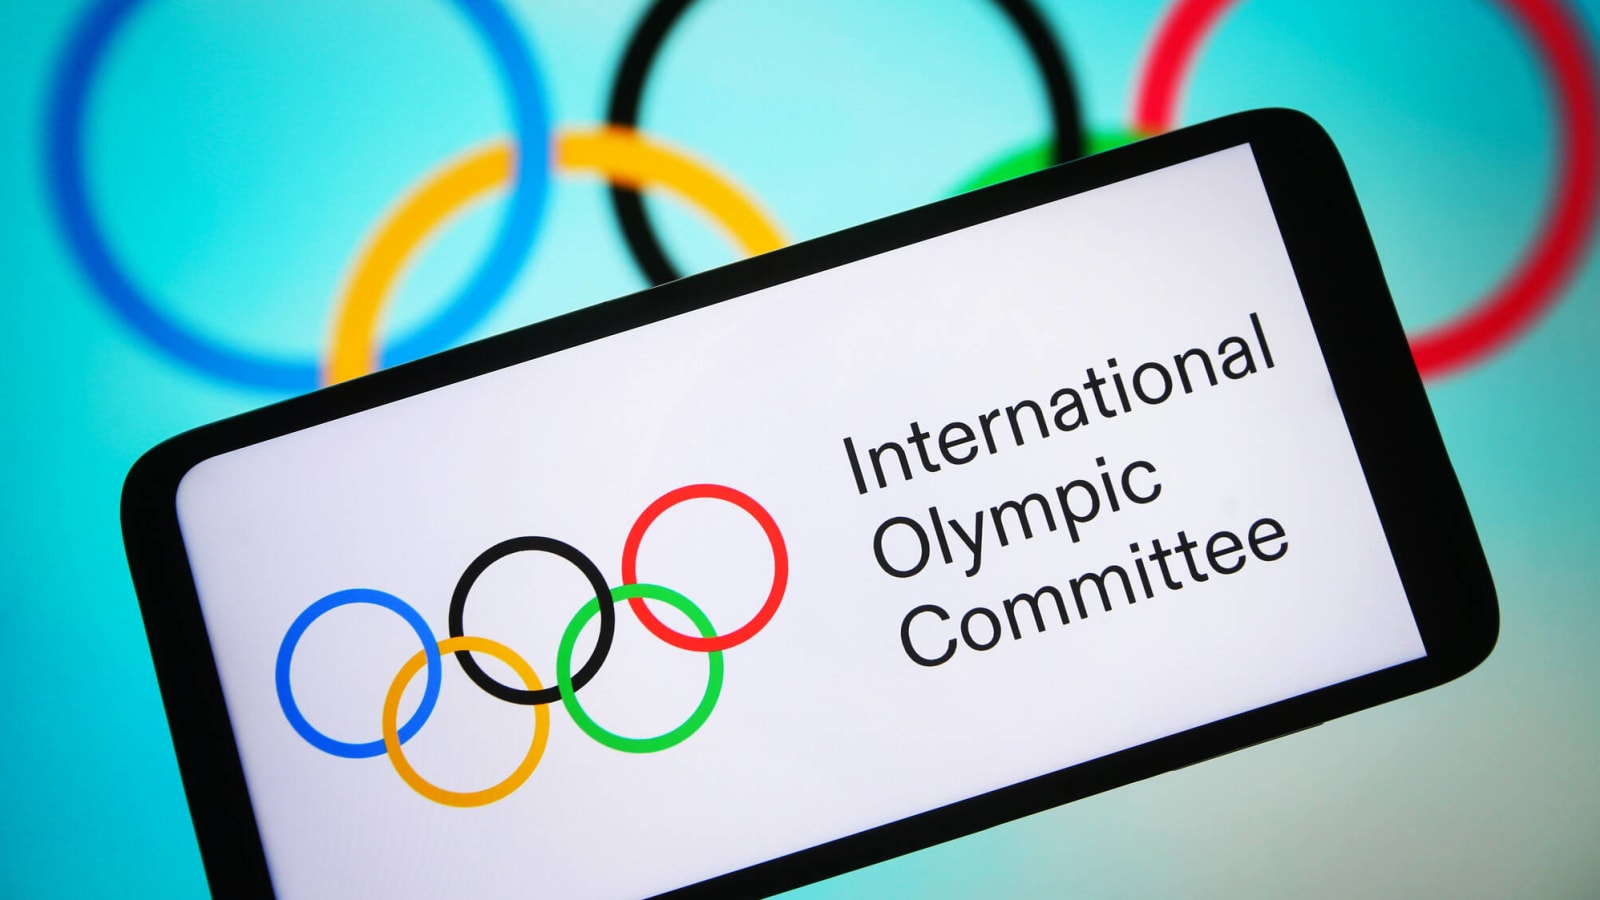 IOC to Explore Packaging Media Rights for Olympic Qualifiers